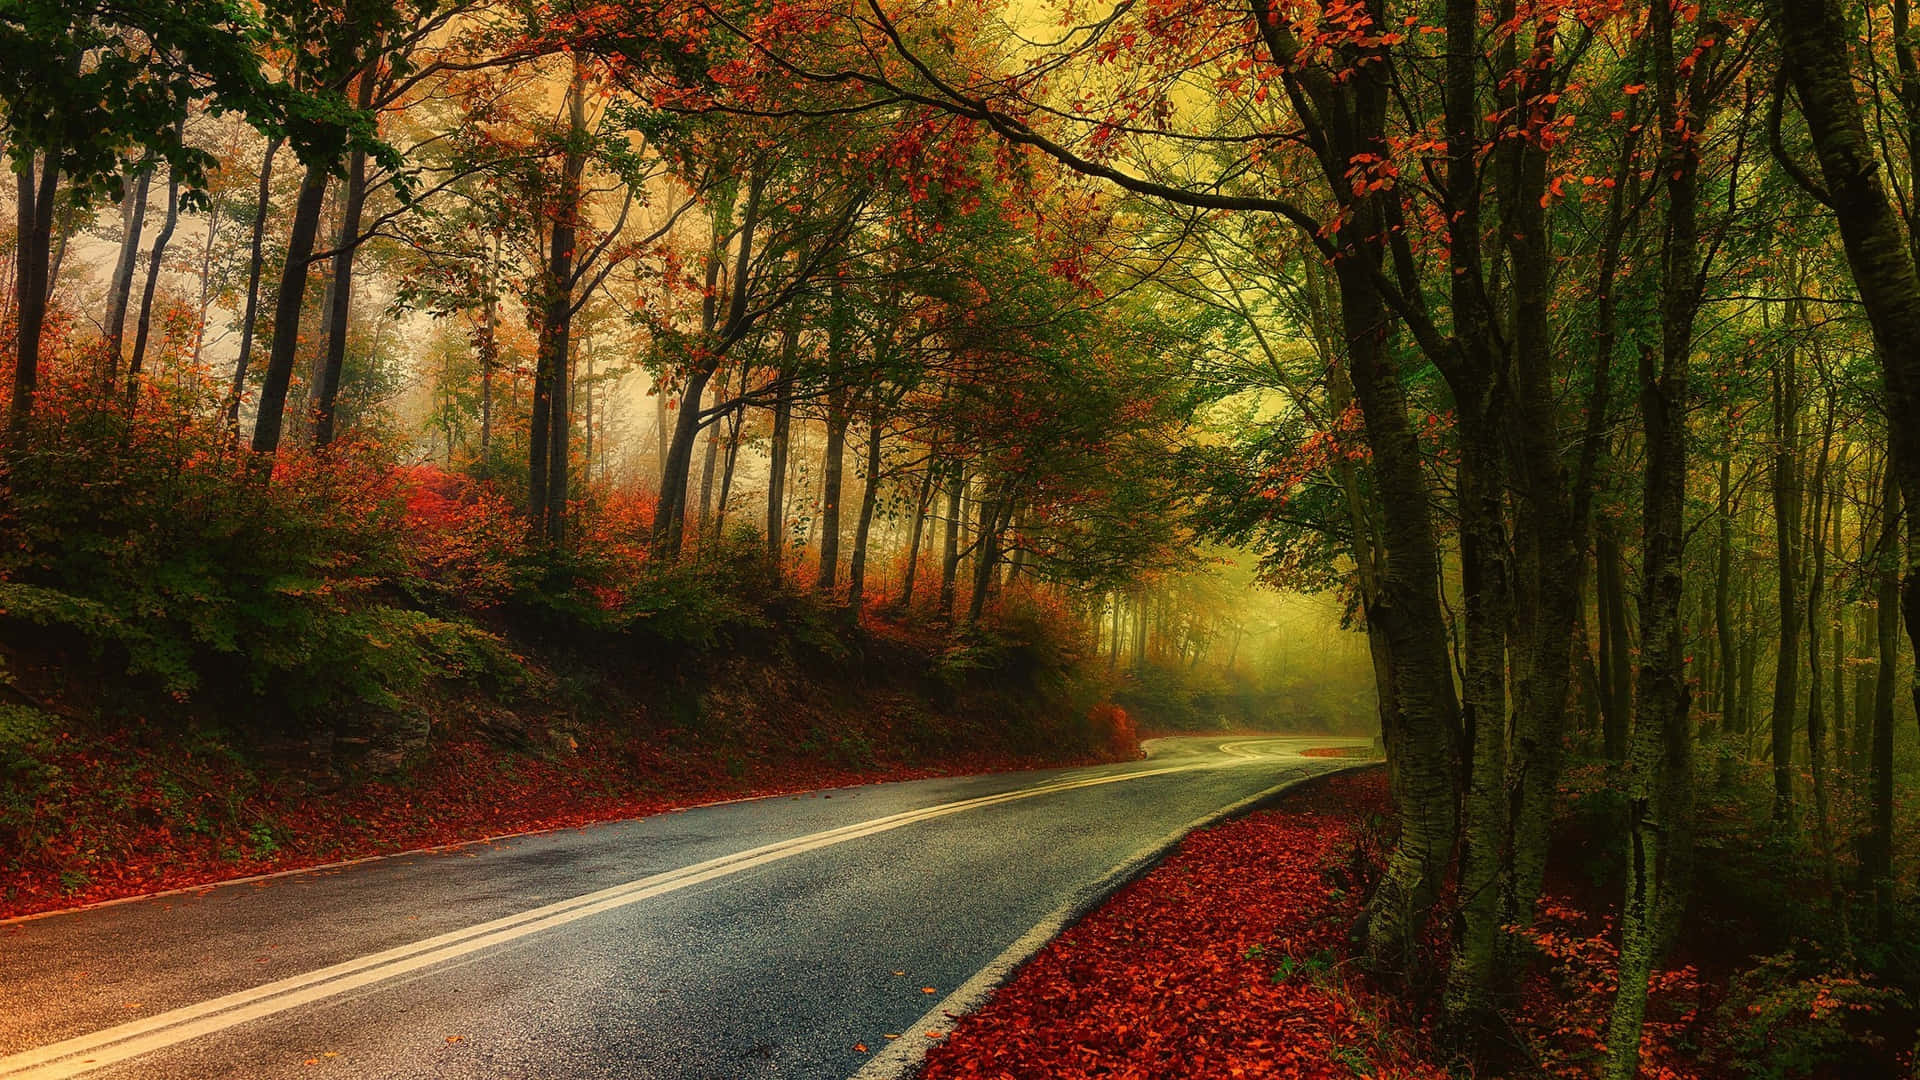 Captivating Fall Foliage in the Forest Wallpaper